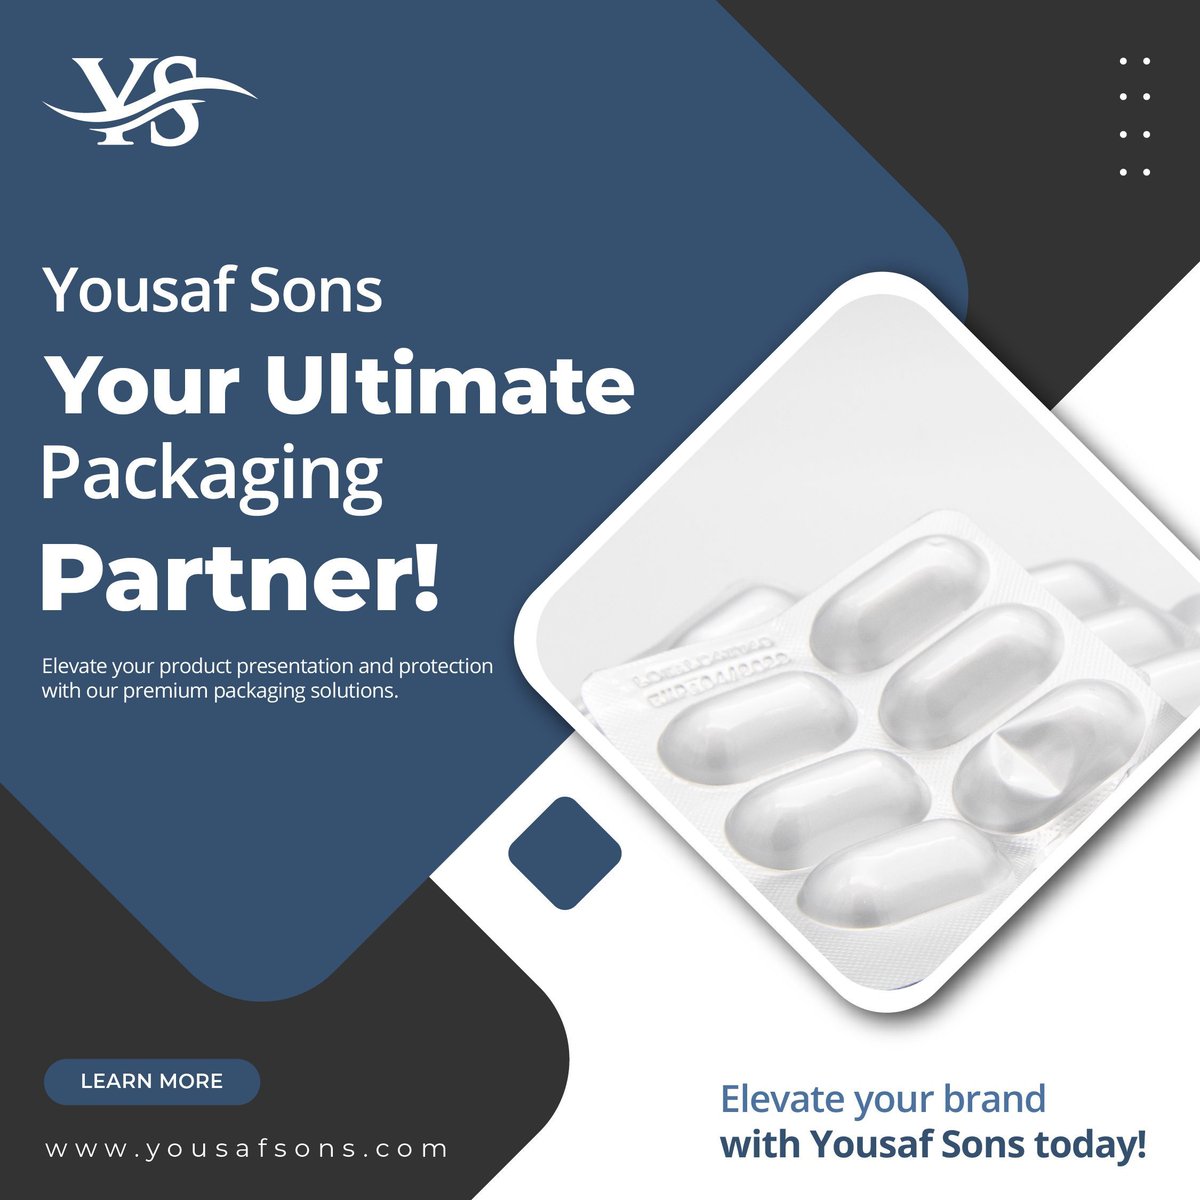 Introducing Yousaf Sons - Your Ultimate Packaging Partner! 🌟 Elevate your product presentation and protection with our premium packaging solutions. #YousafSons #PackagingSolutions #PremiumQuality #Innovation #ElevateYourProducts #FoodIndustry #Pharmaceuticals